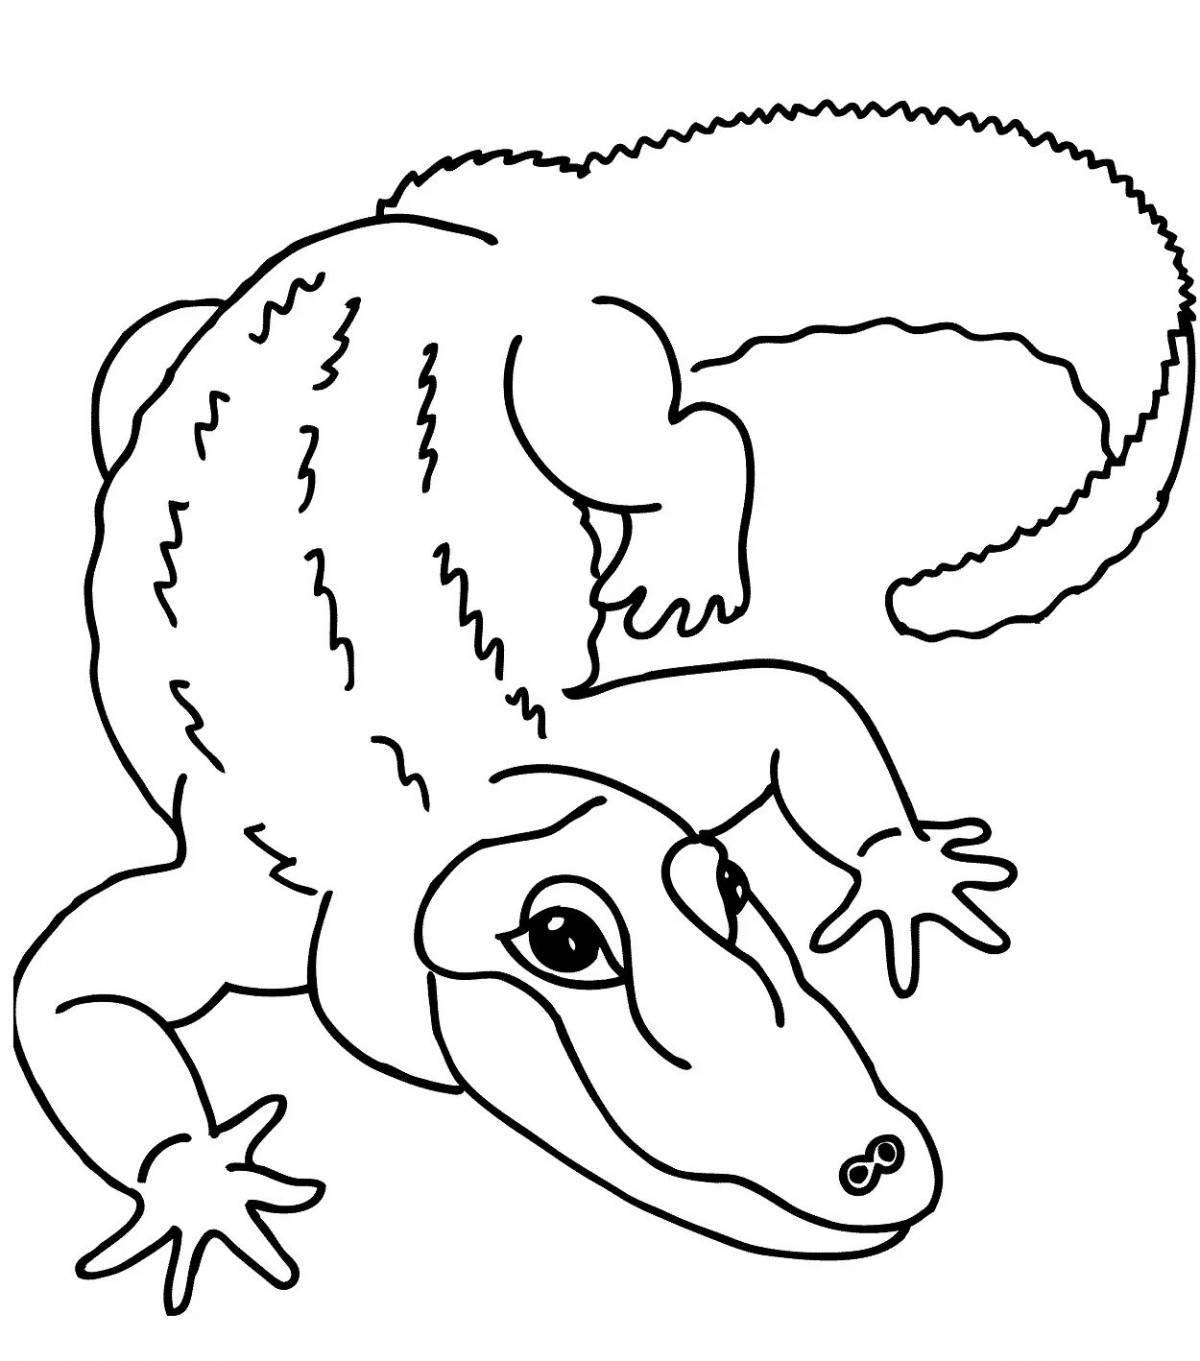 Humorous coloring crocodile for children 3-4 years old